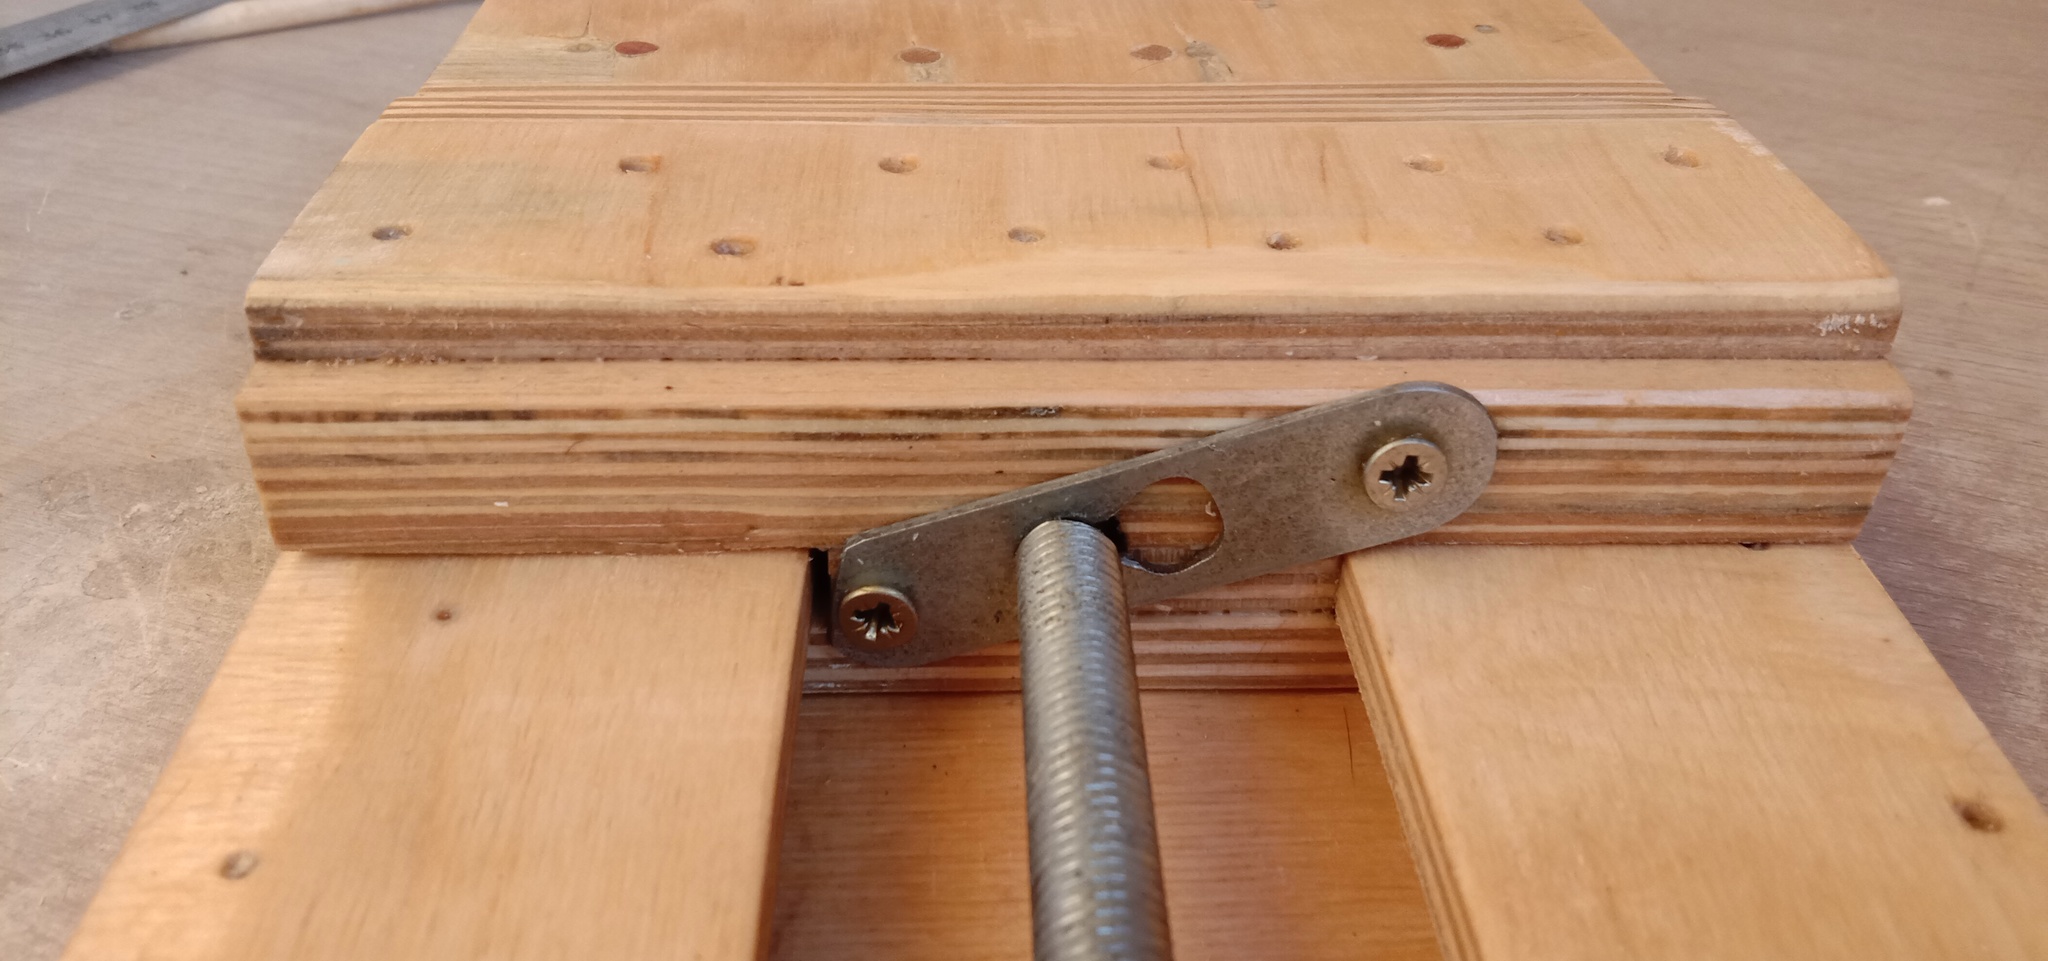 Plywood vice - My, Needlework without process, Plywood, Vise, Vertical video, Video, Longpost